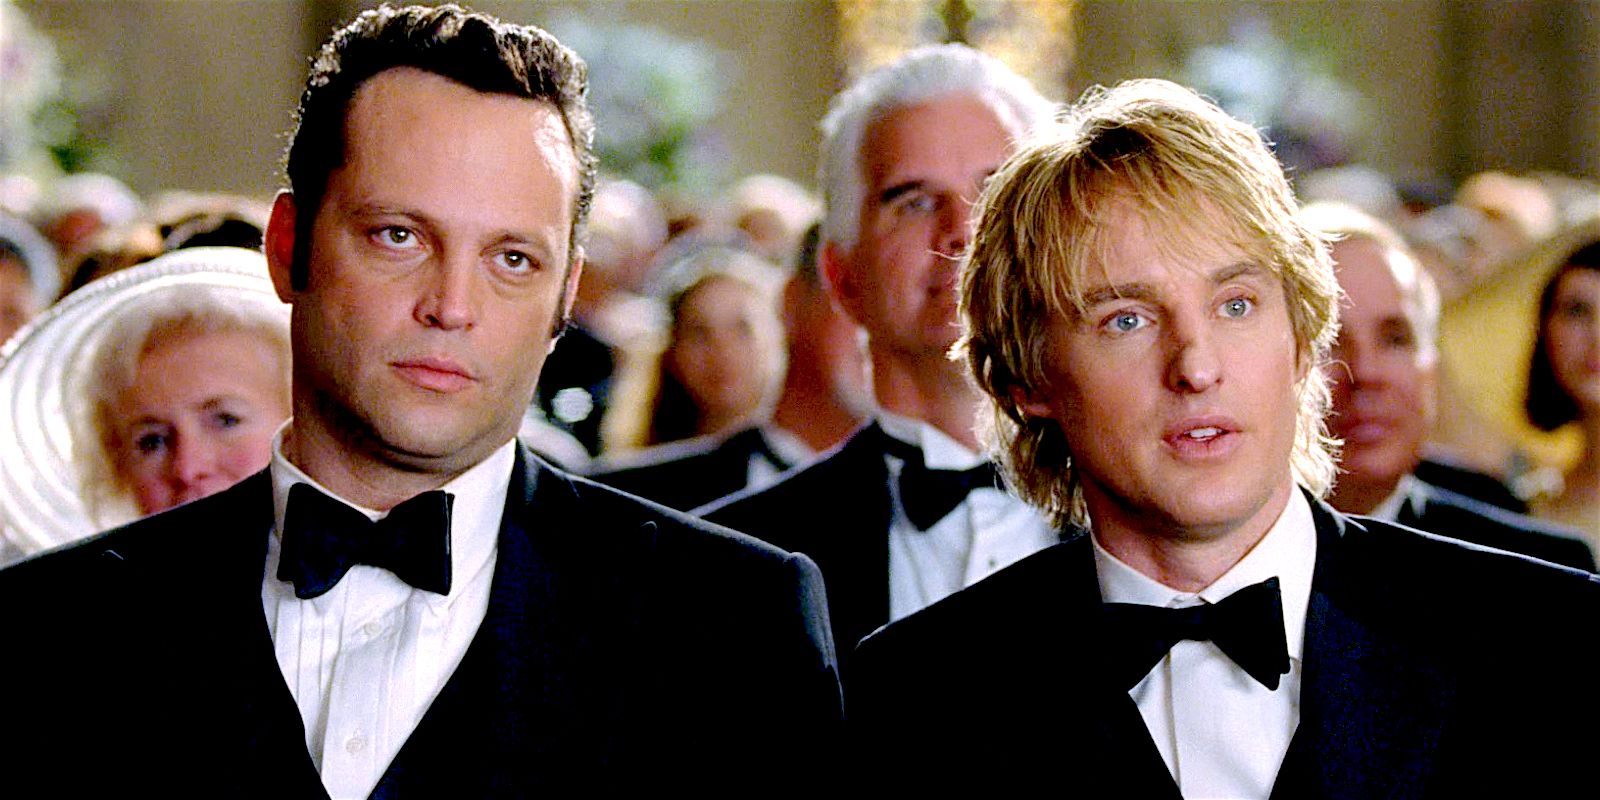 John and Jeremy look on blandly while attending a wedding in Wedding Crashers